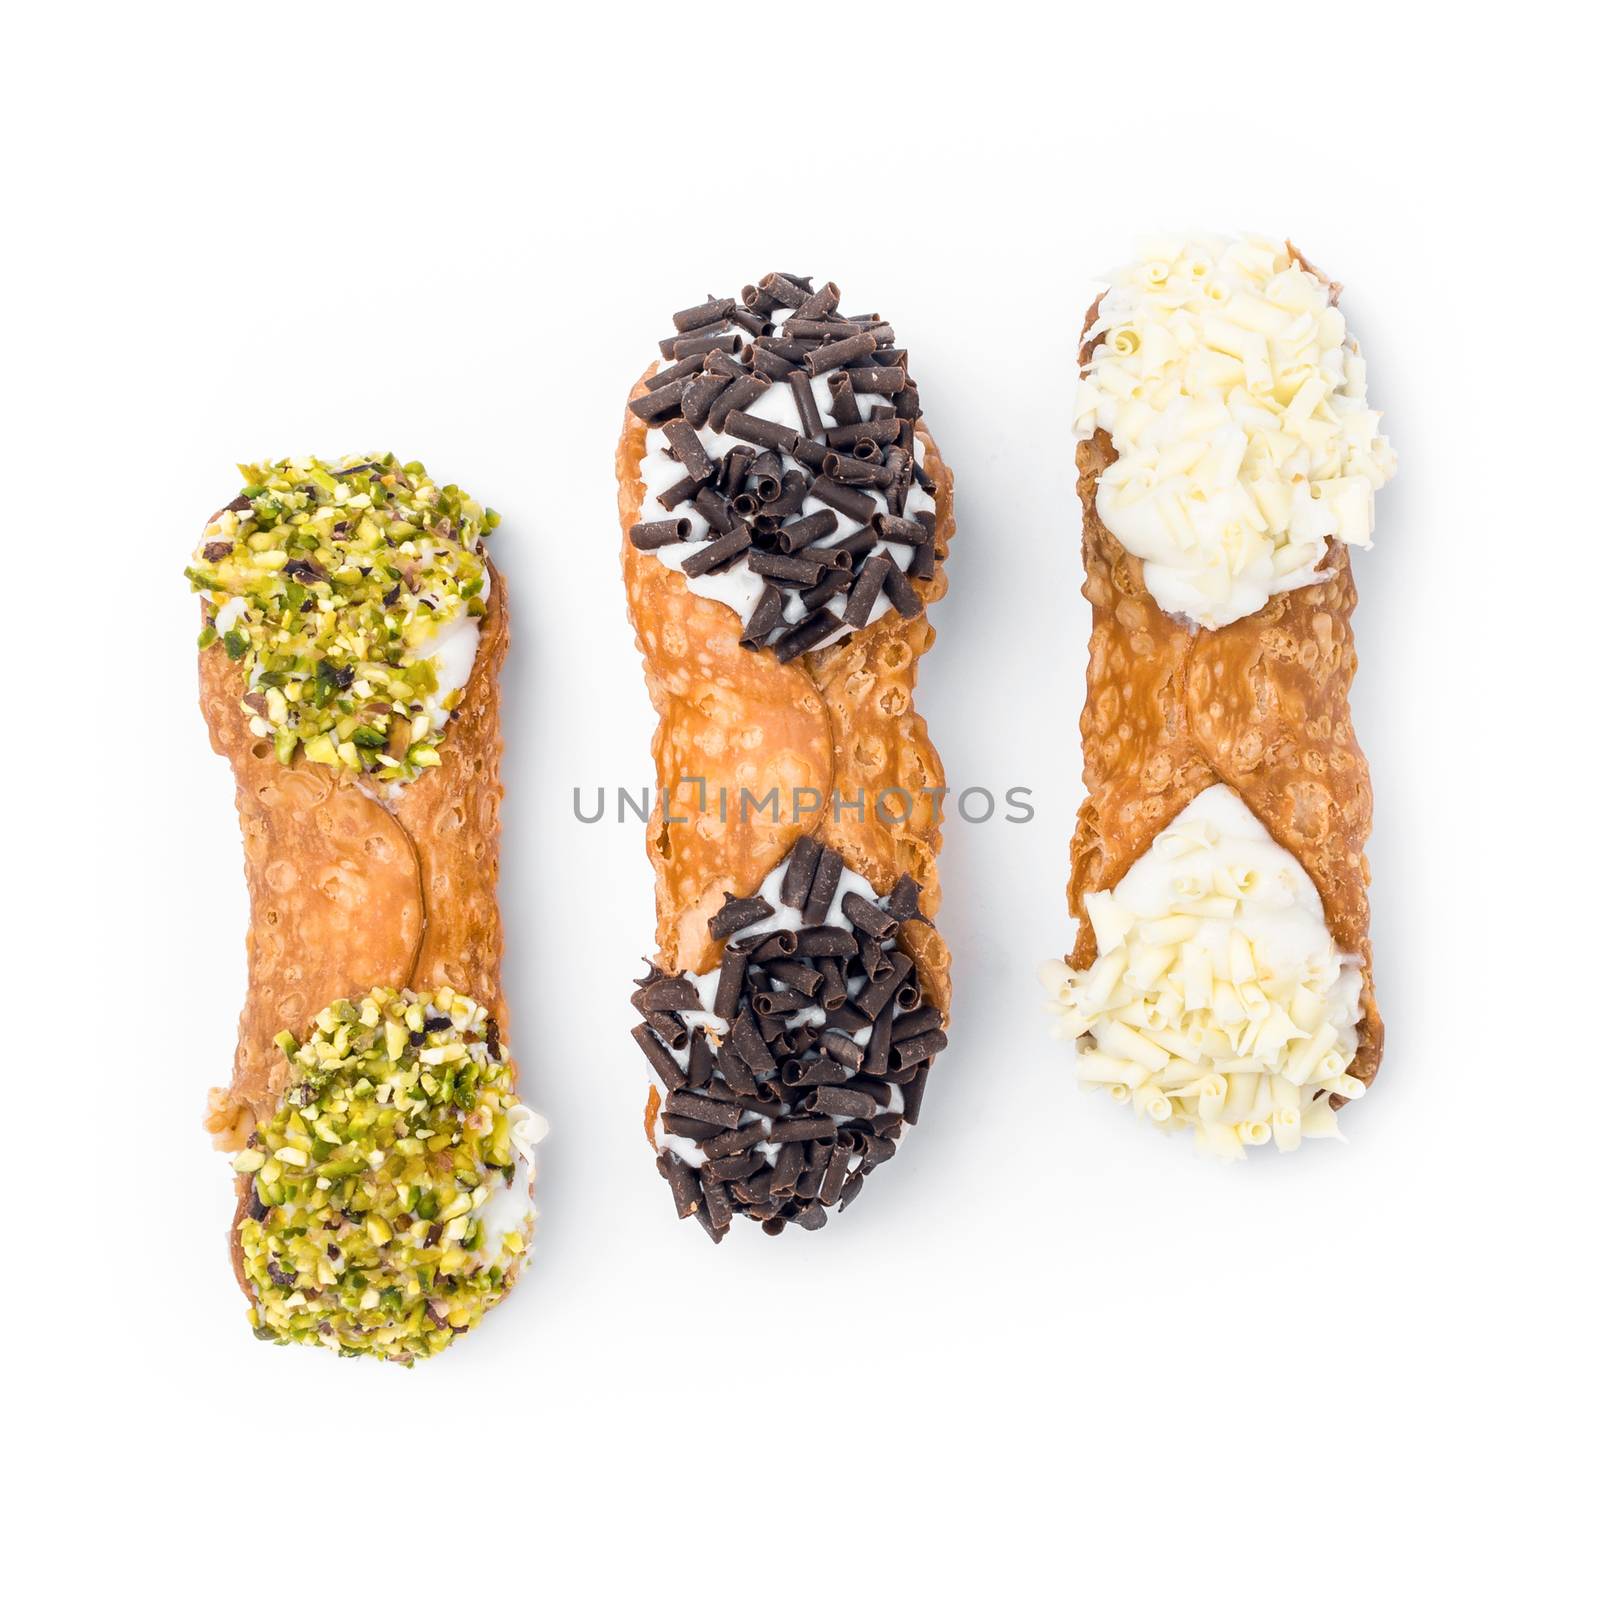 Sicilian cannoli. Three cannoli pastries. Traditional Sicilian dessert, filled with a rich ricotta cream enriched with pistachio grain, hazelnut grain and chocolate flakes.